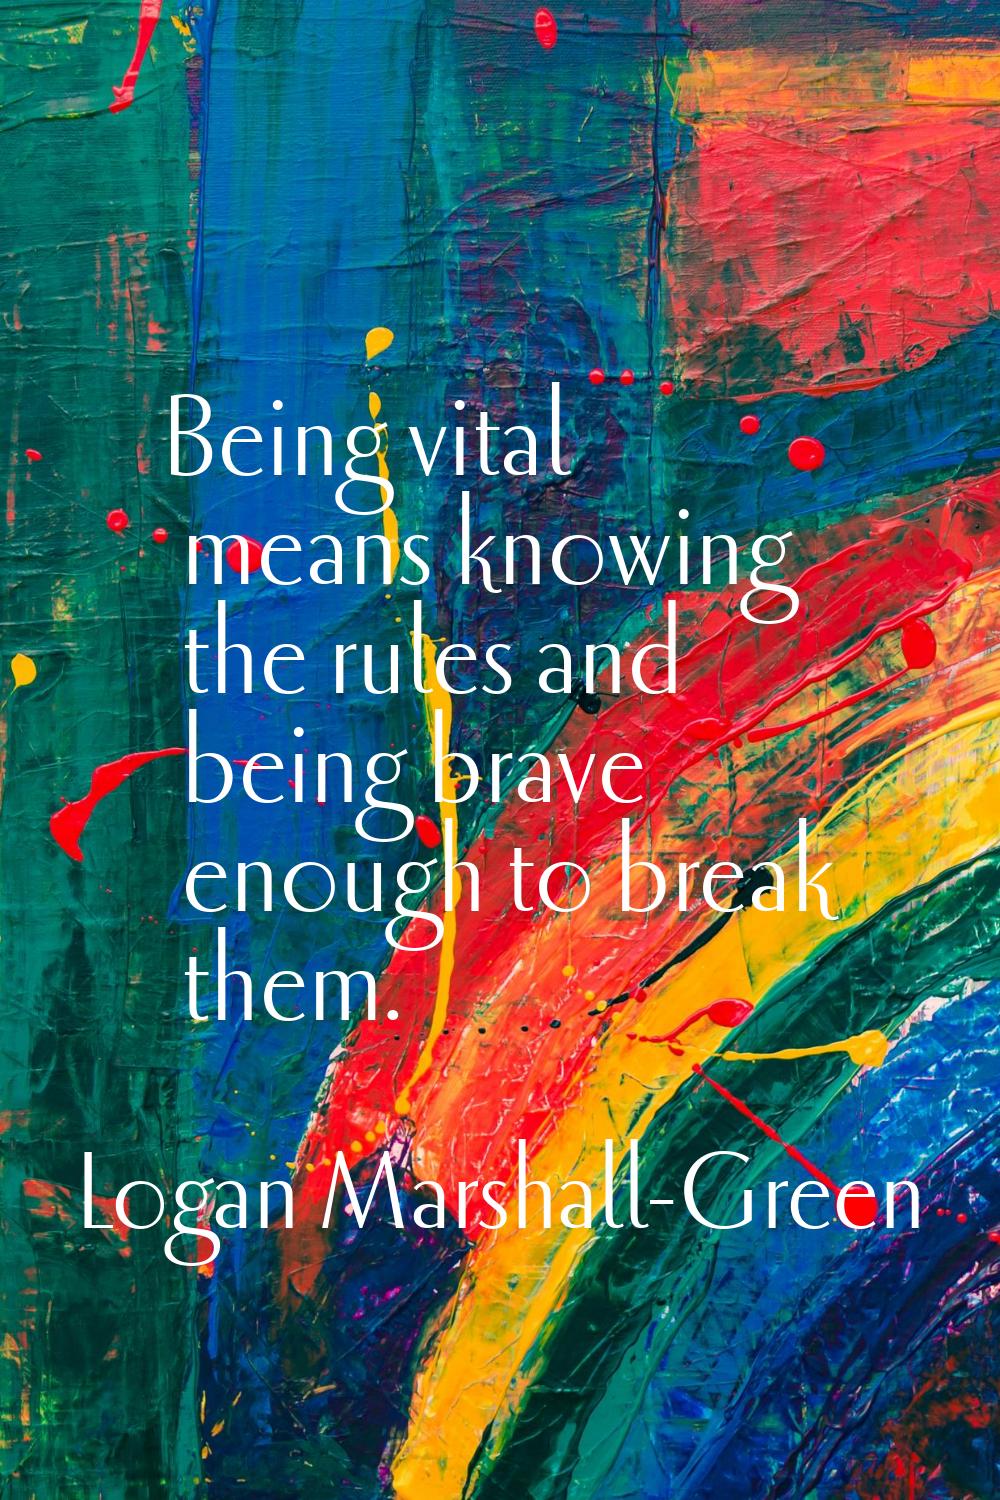 Being vital means knowing the rules and being brave enough to break them.